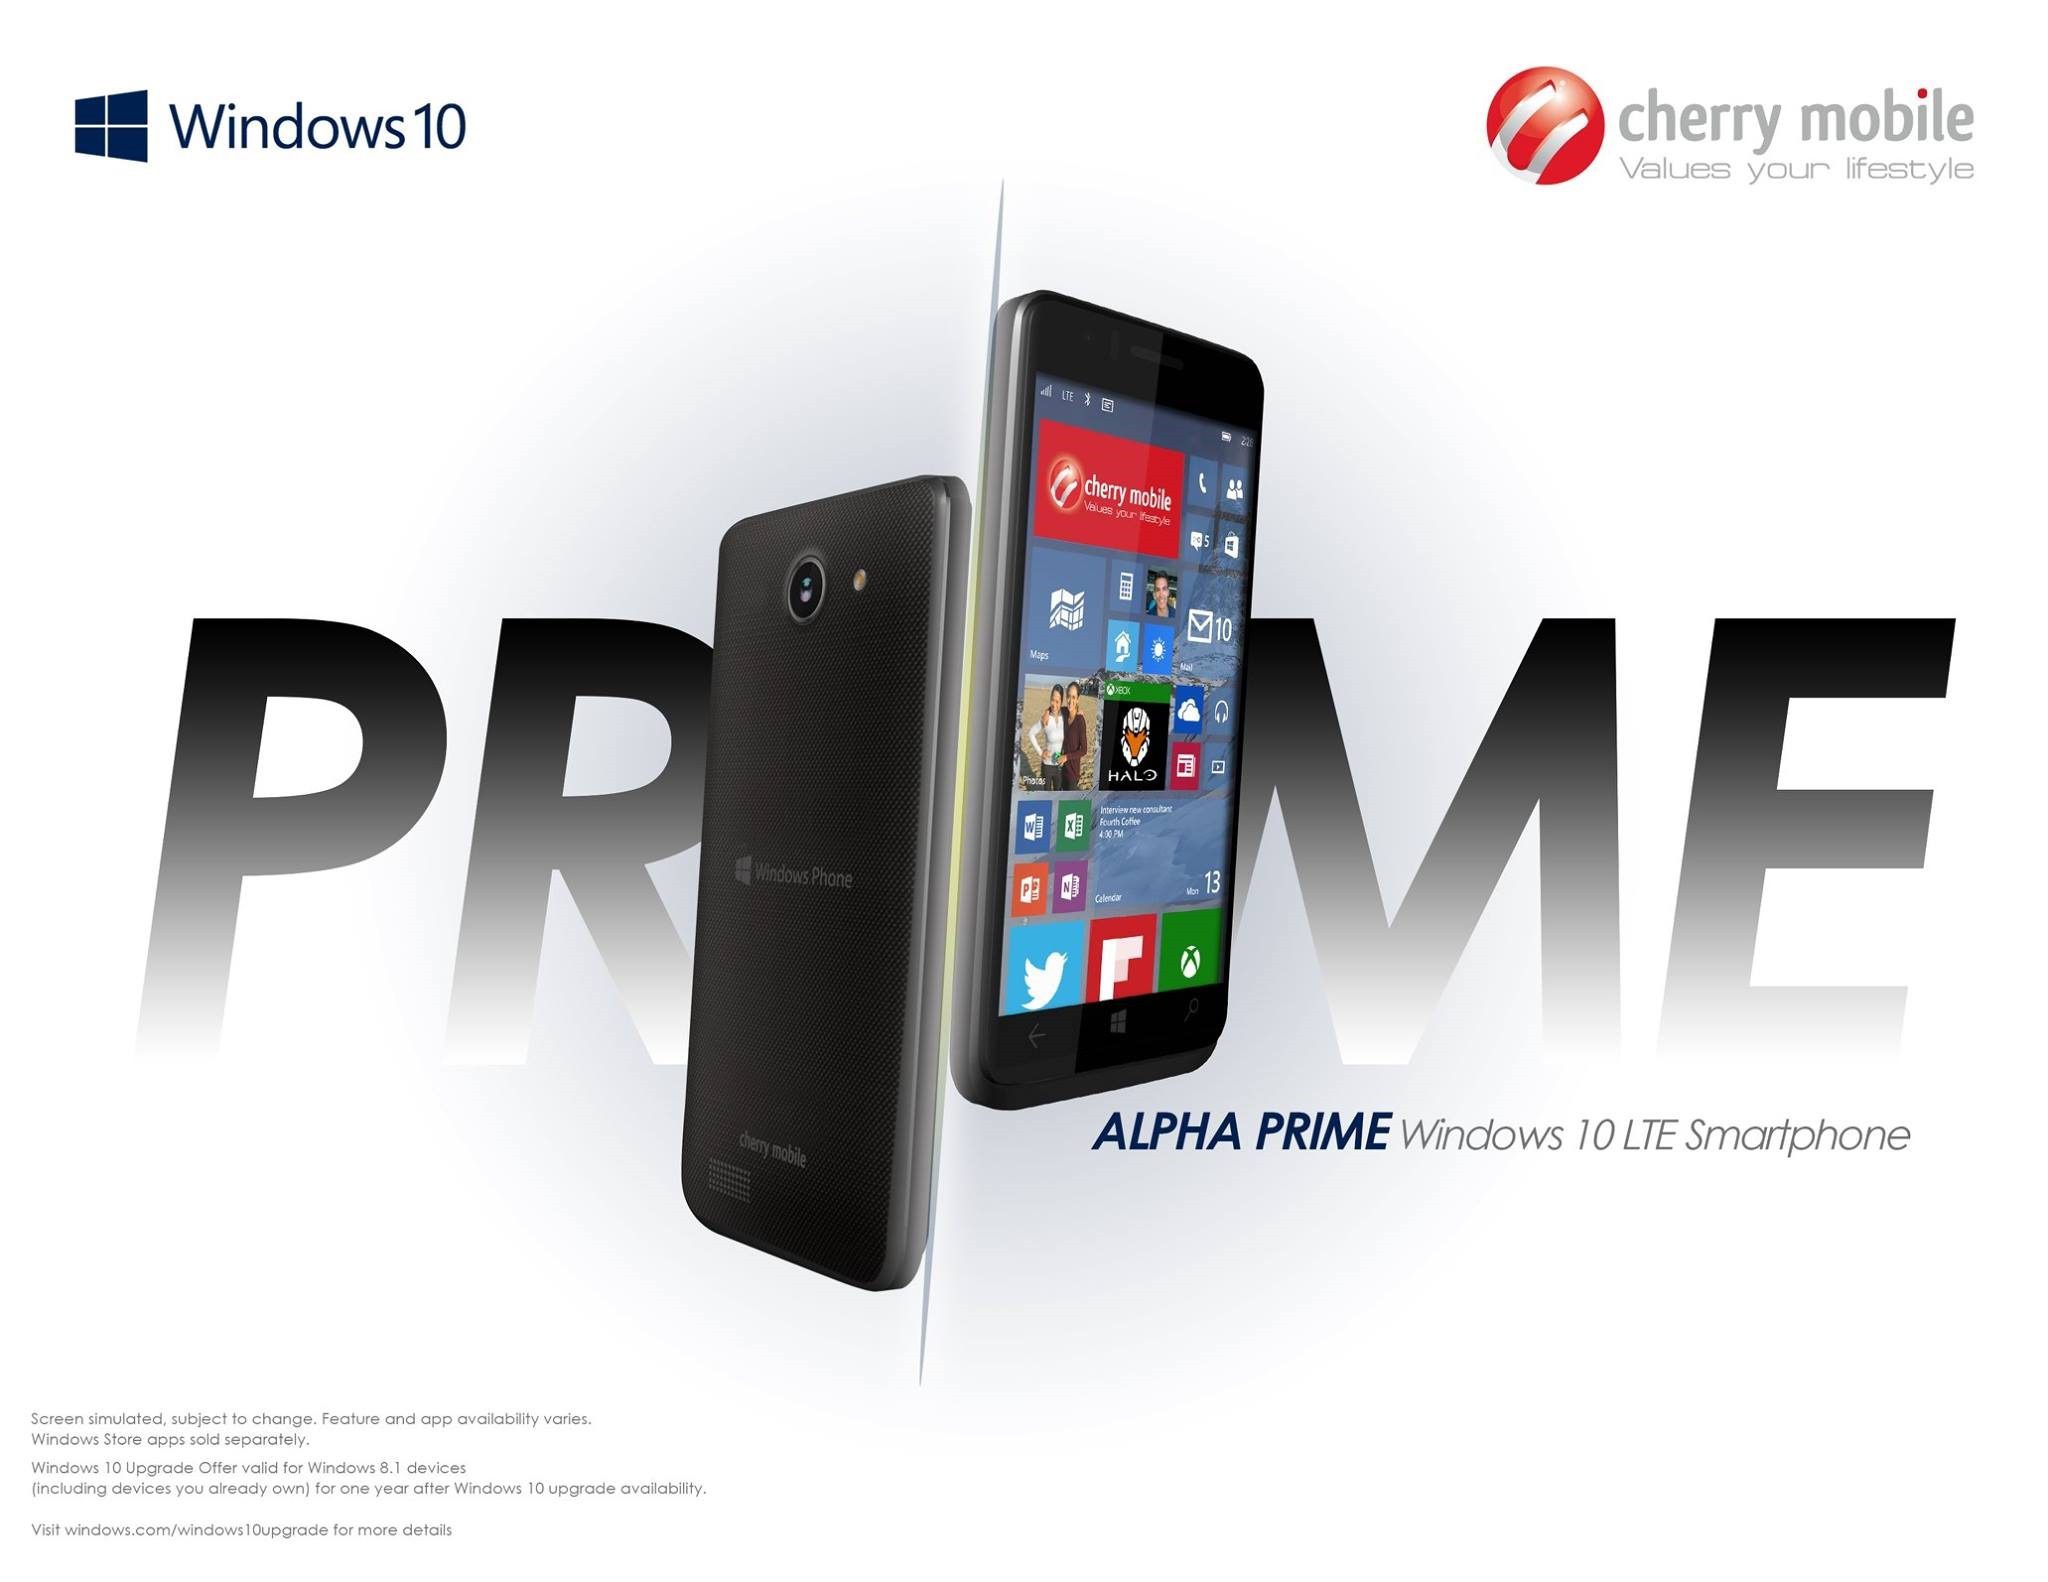 Cherry Mobile announce the Windows 10 Alpha Prime 4 and 5